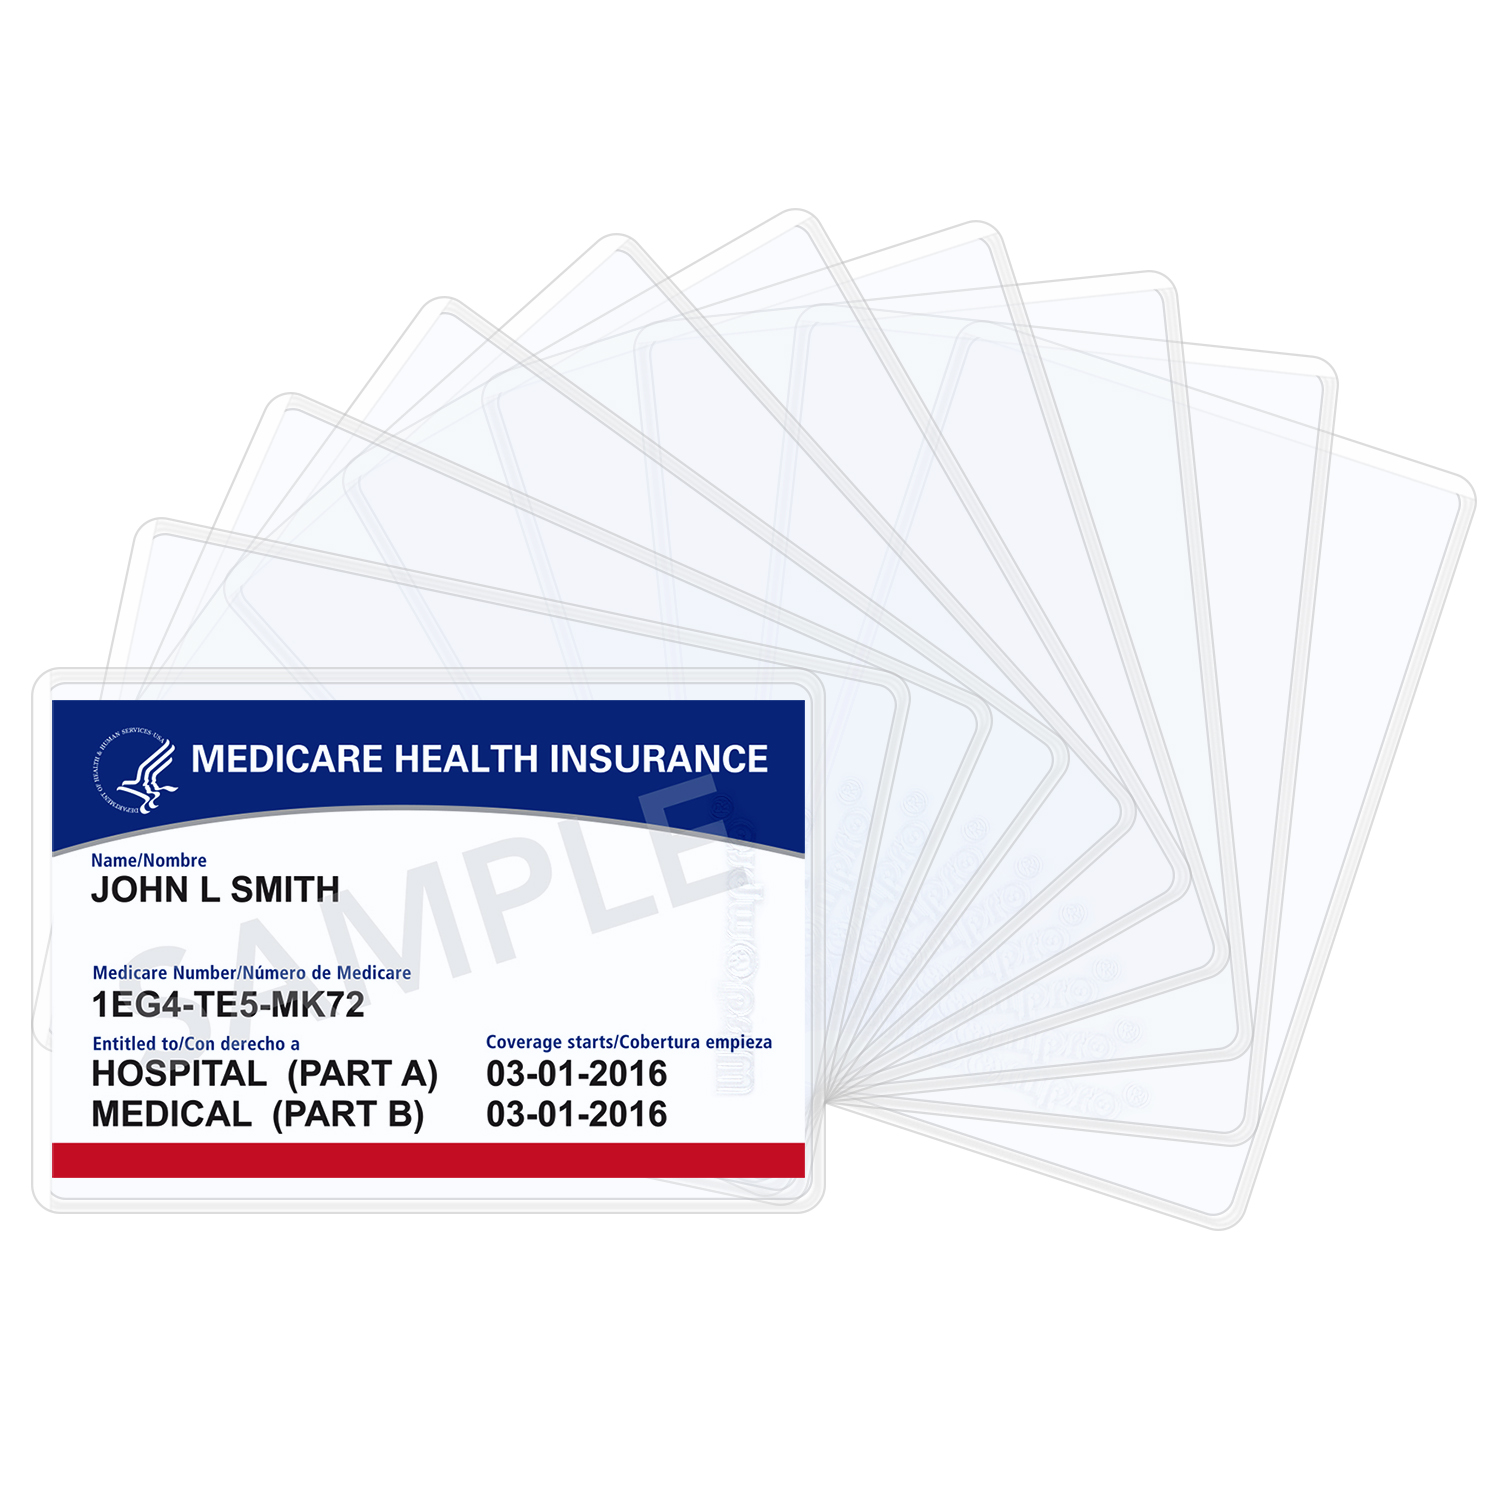  Customer reviews: MaxGear New Medicare Card Holder Protector  Sleeves 6 Pack, 12 Mil Clear PVC Water Resistant for New Medicare Card,  Business Cards, Social Security Card Protector